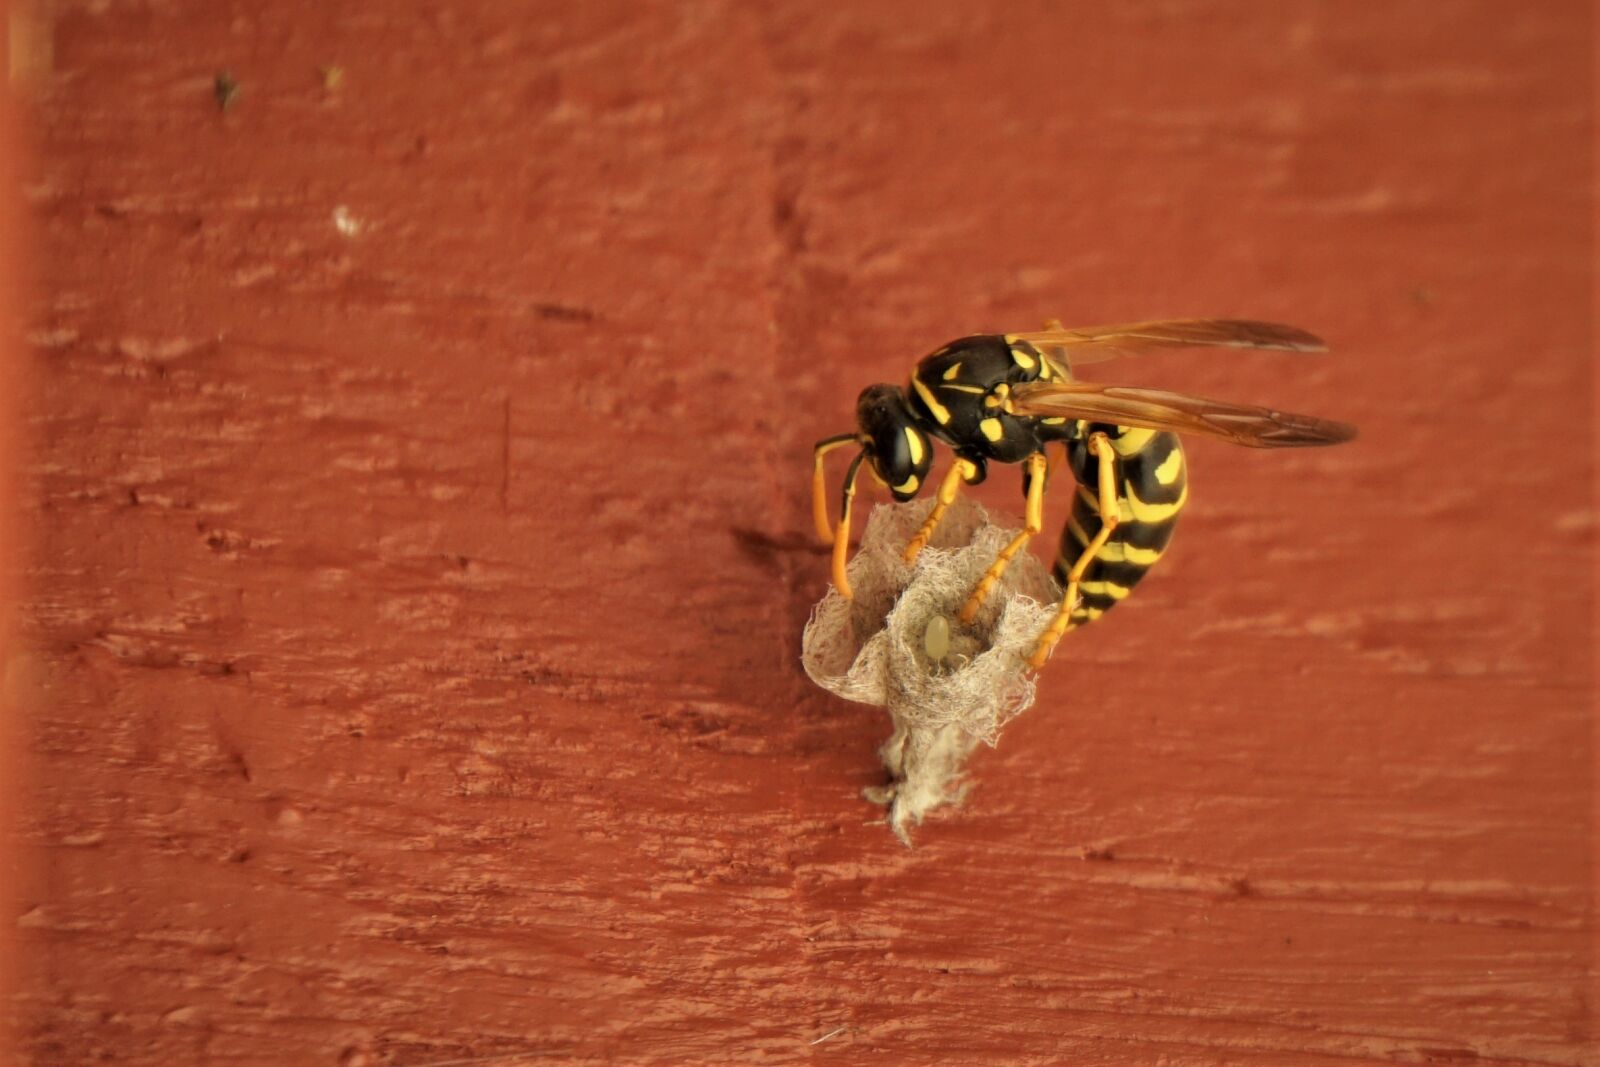 Sony a5100 sample photo. Wasp, the hive, field photography